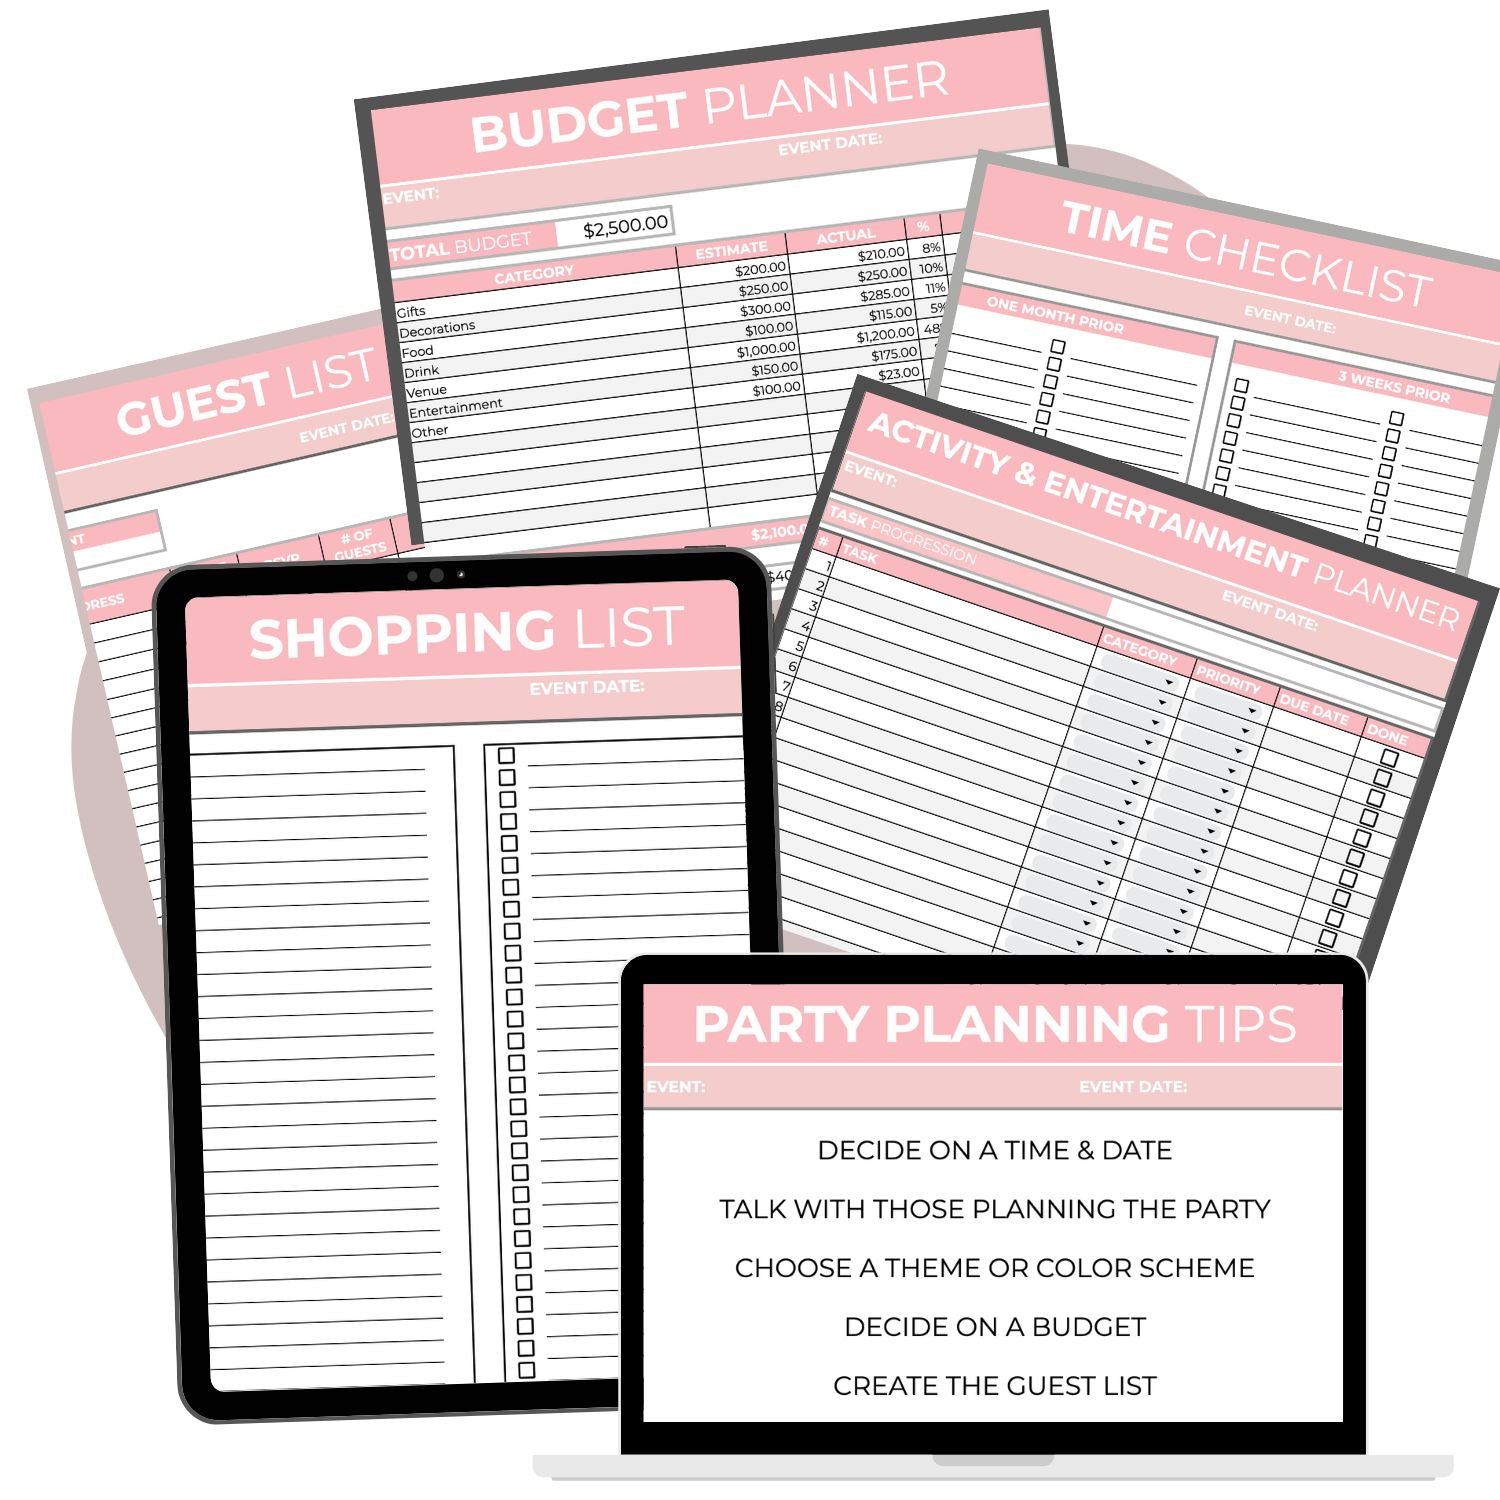 6 pages inside the printable party planner and editable spreadsheets including - activity planner, party planning tips, shopping list, guest list, budget planner, and an event planning checklist.